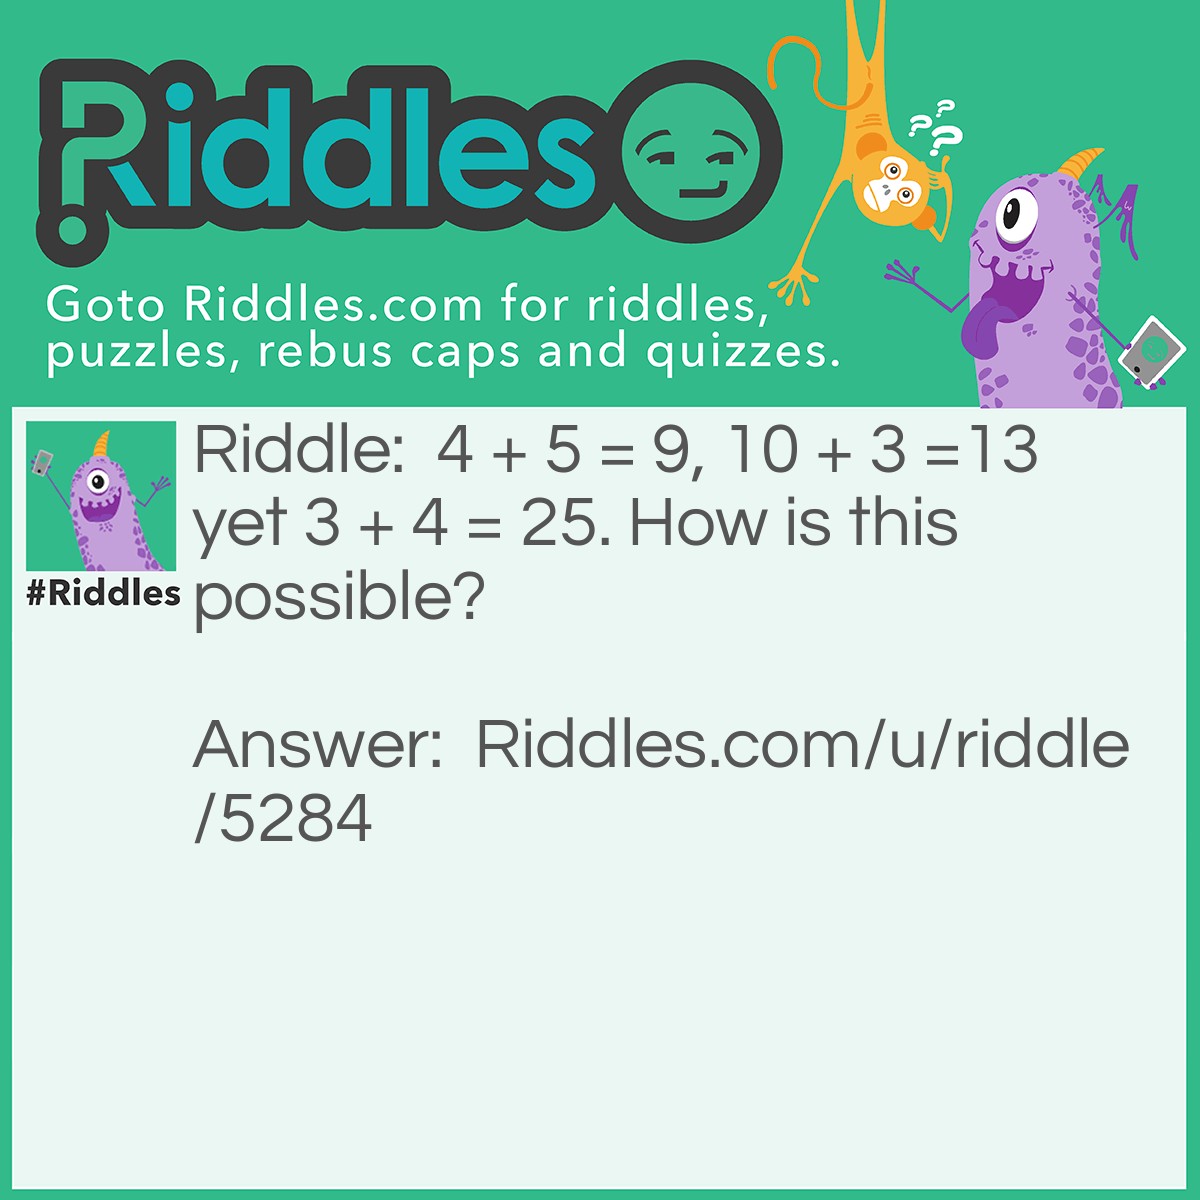 Riddle: 4 + 5 = 9, 10 + 3 =13 yet 3 + 4 = 25. How is this possible? Answer: Take square of 3 (it would be 9), then also take square of 4 (it would be 16), and add them together i.e 9+16=25